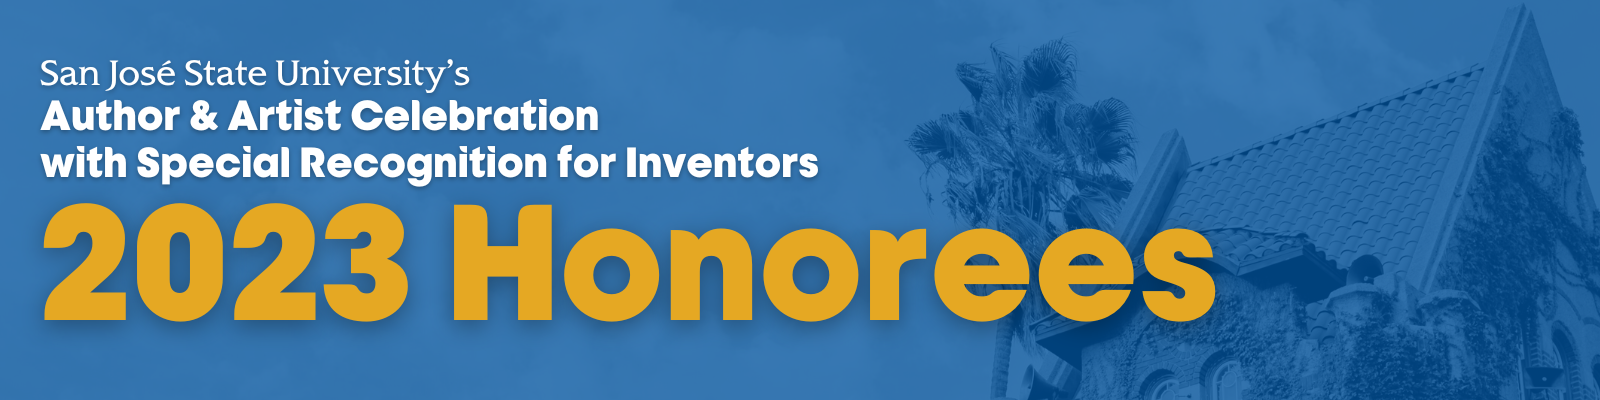 San Jose State University's Author and Artist Celebration with Special Recognition for Inventors: 2023 Honorees